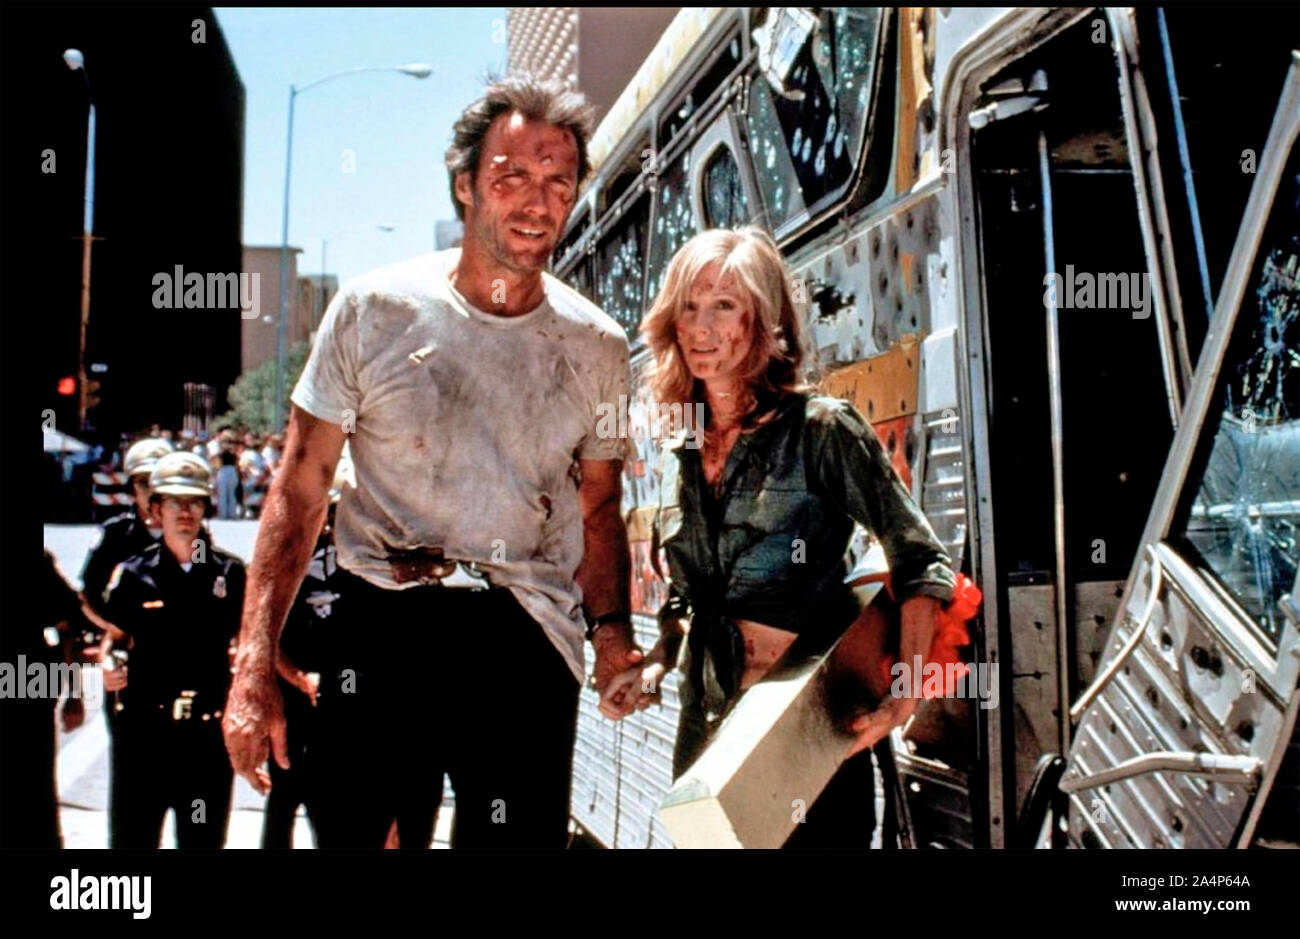 THE GAUNTLET 1977 Warner Bros film with Clint Eastwood and Sondra Locke  Stock Photo - Alamy